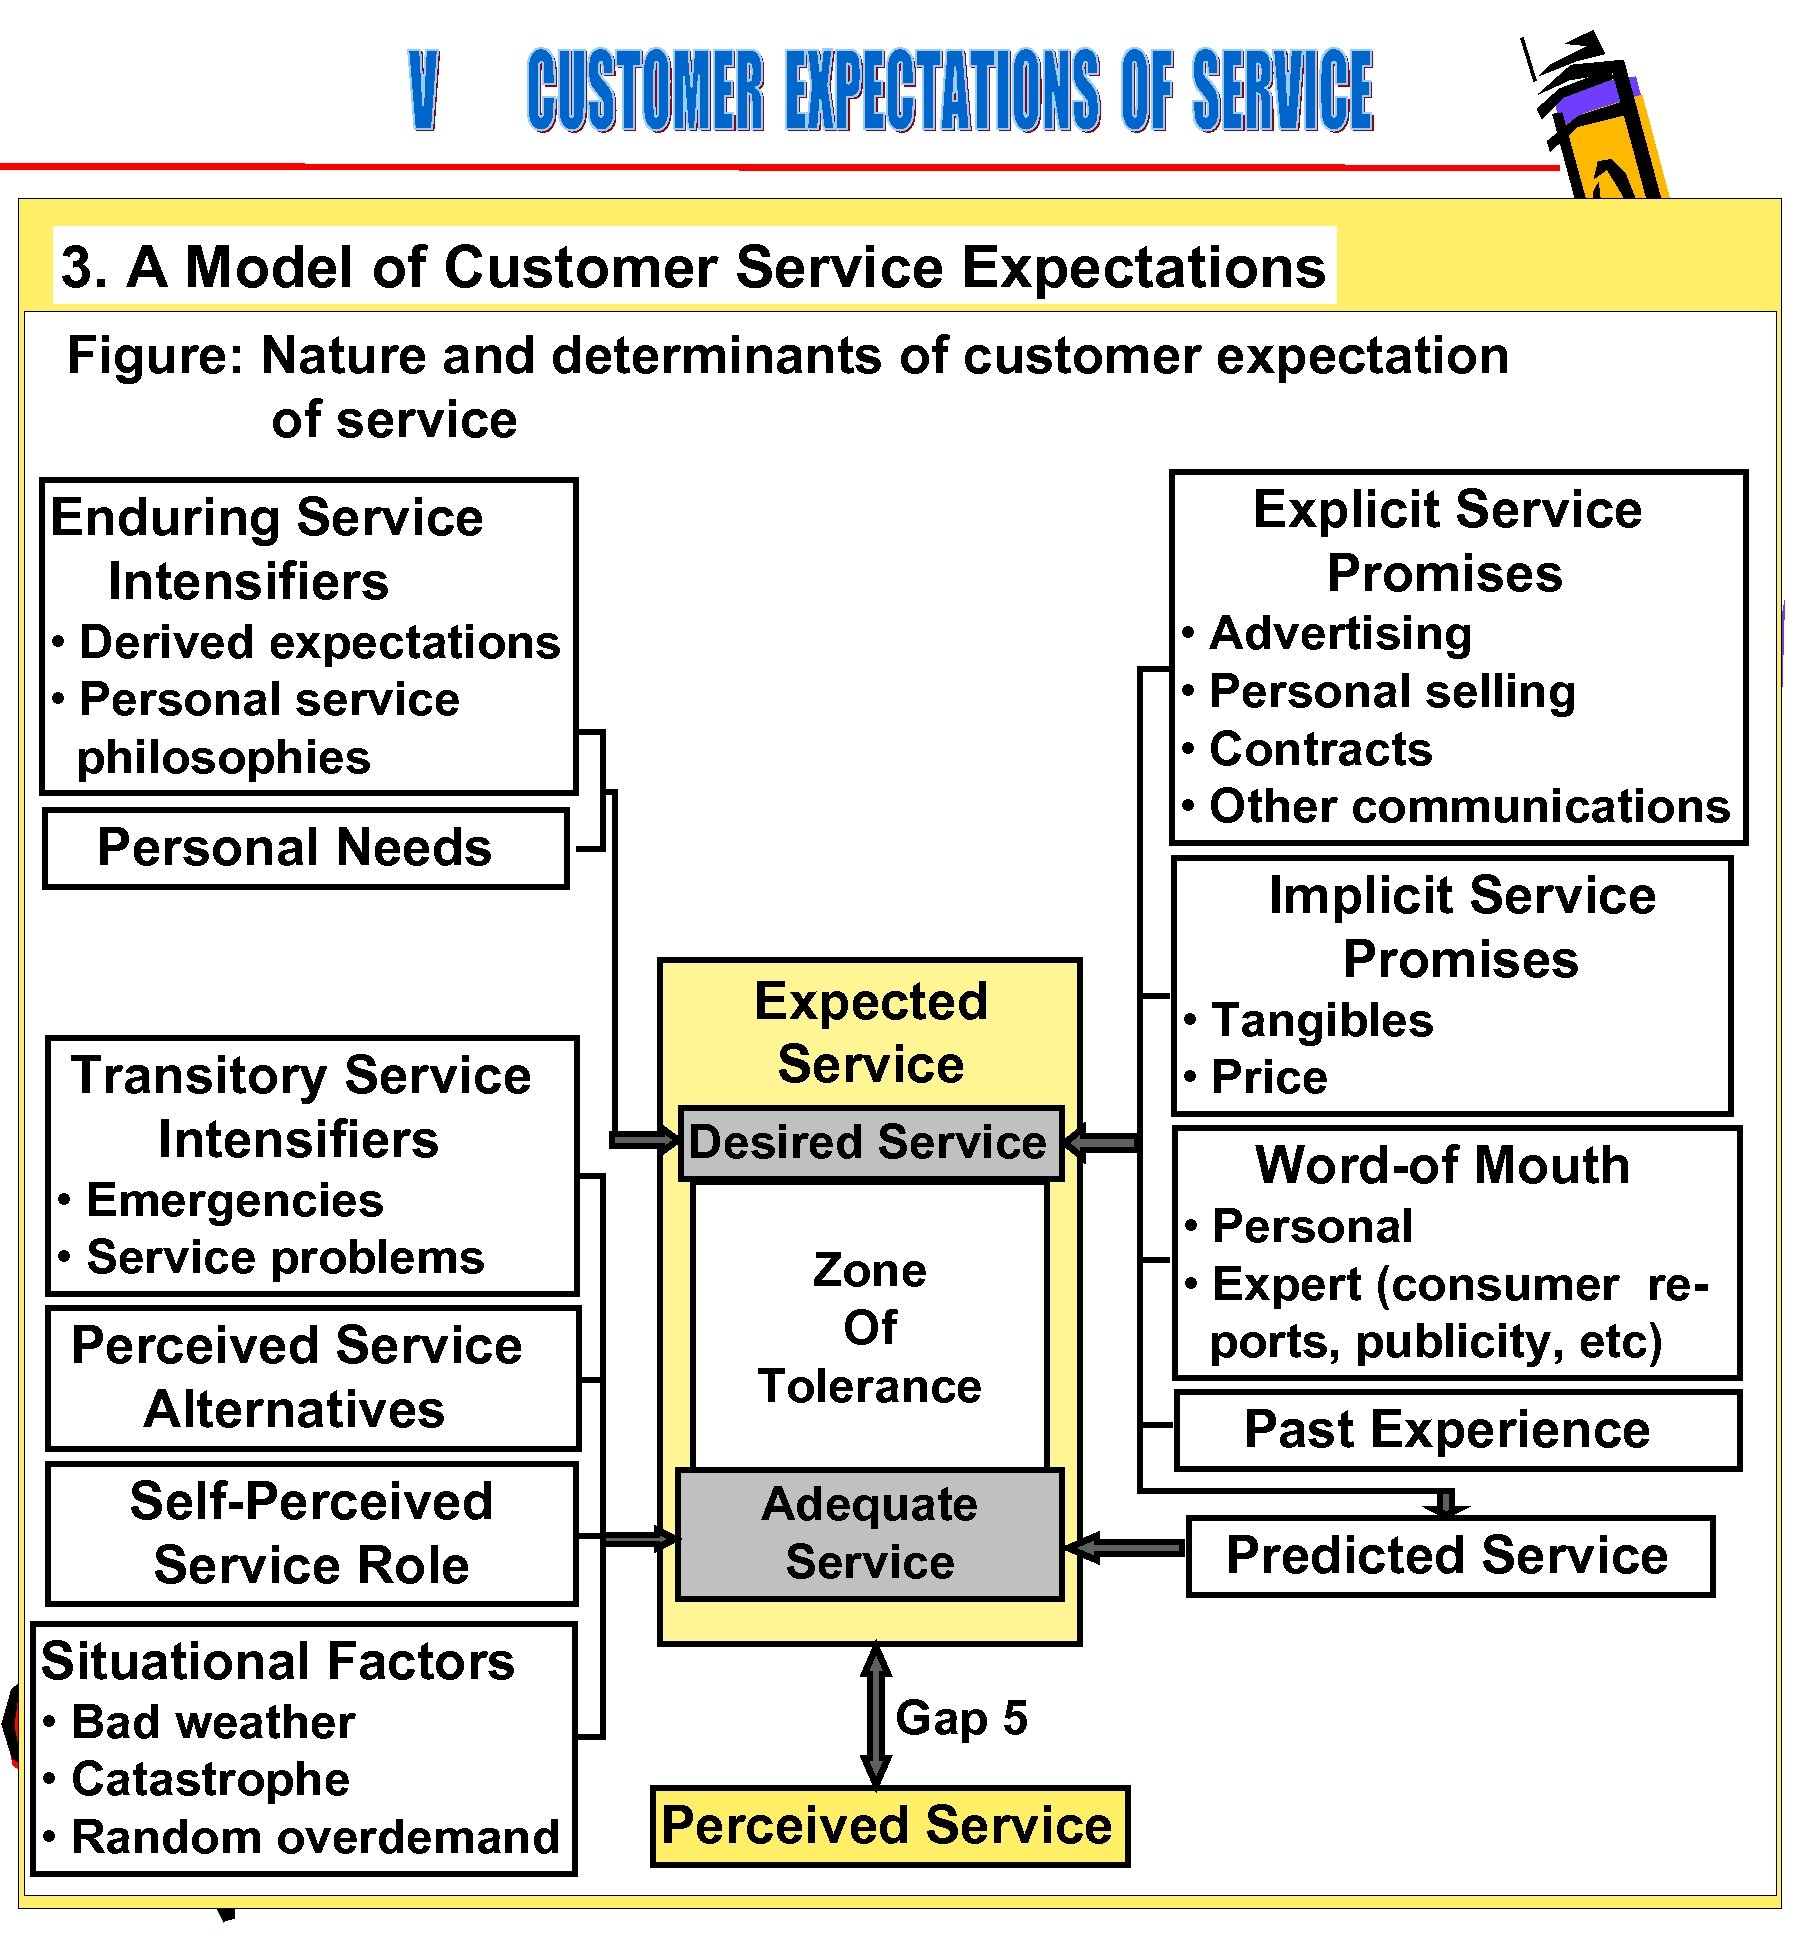 3. A Model of Customer Service Expectations Figure: Nature and determinants of customer expectation